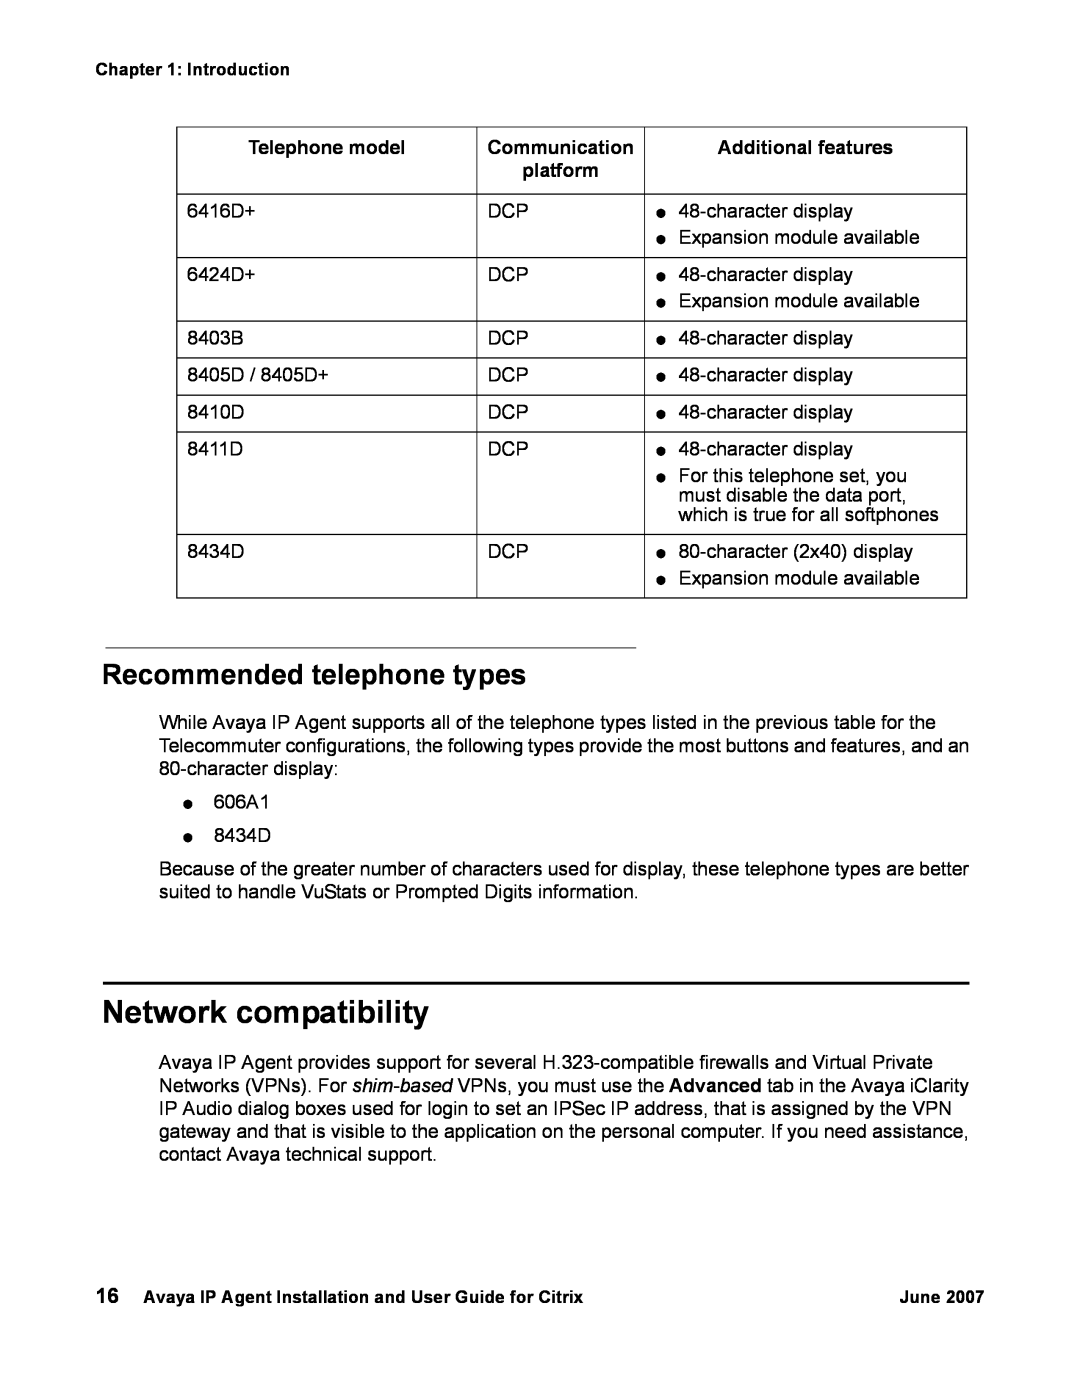 Avaya 7 manual Network compatibility, Recommended telephone types 